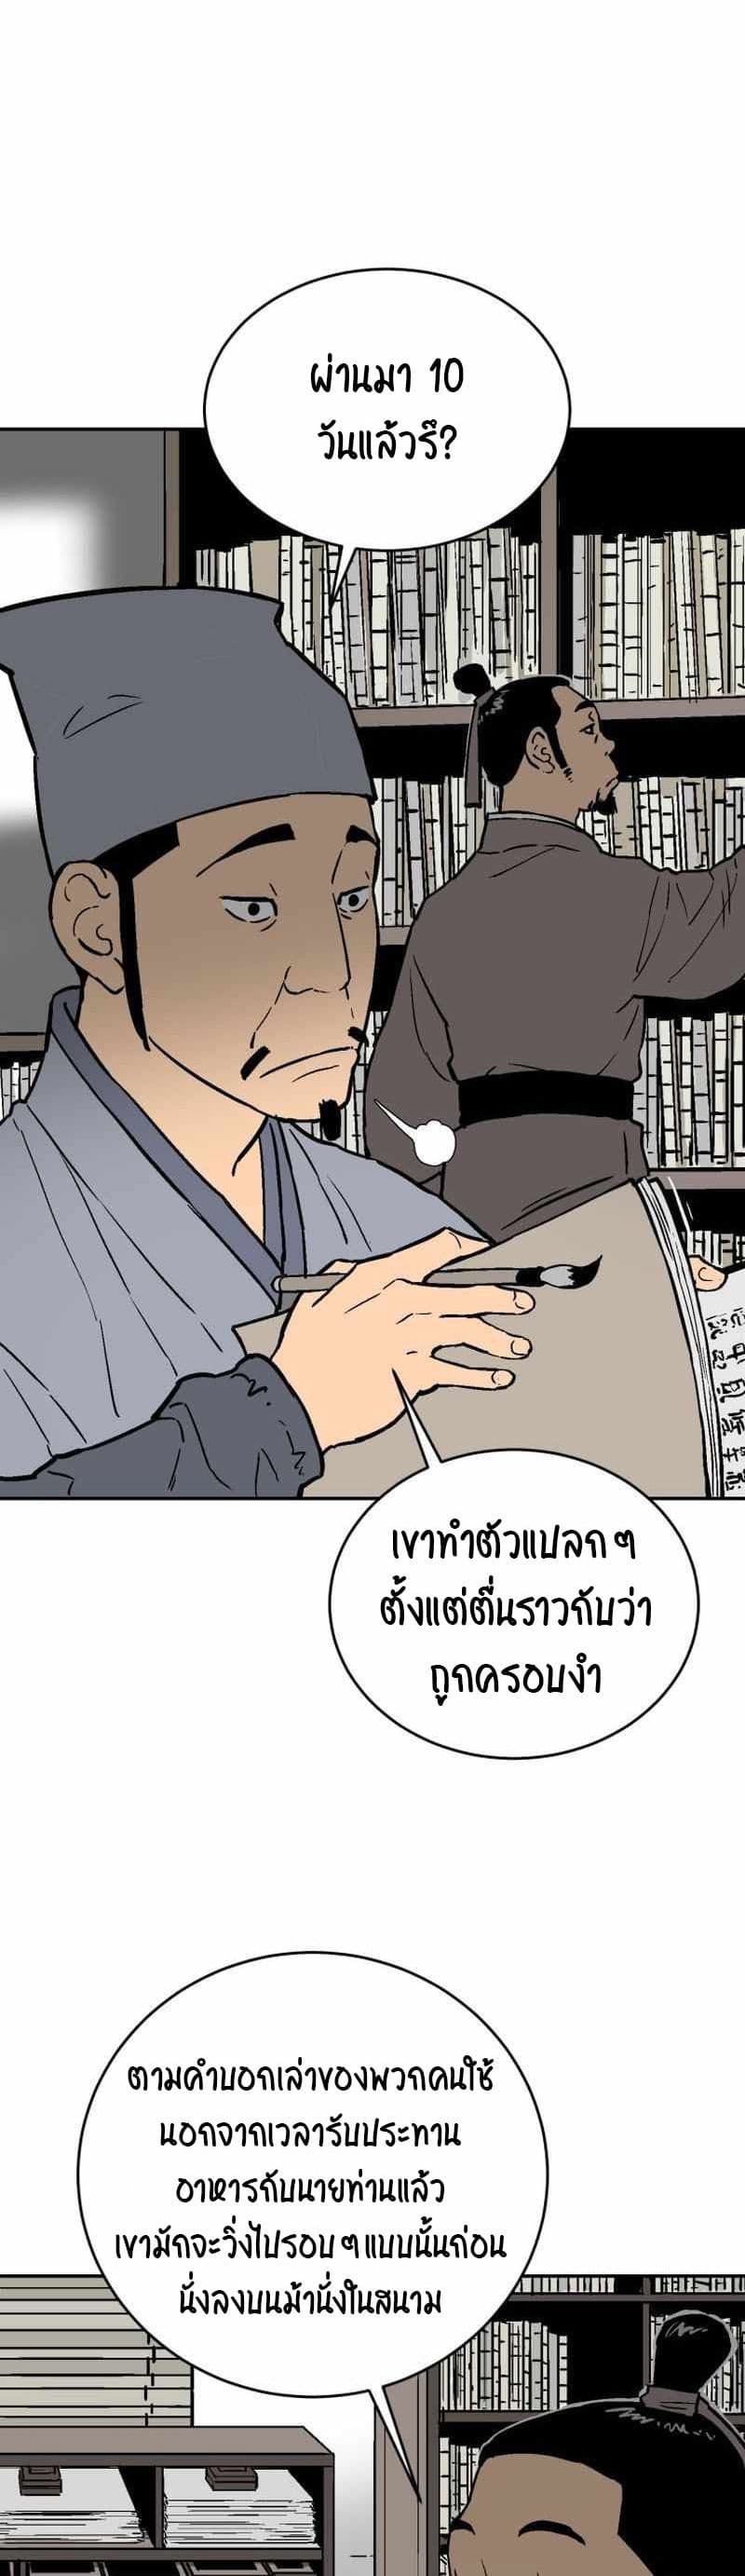 Tales of A Shinning Sword ตอนที่ 4 (6)